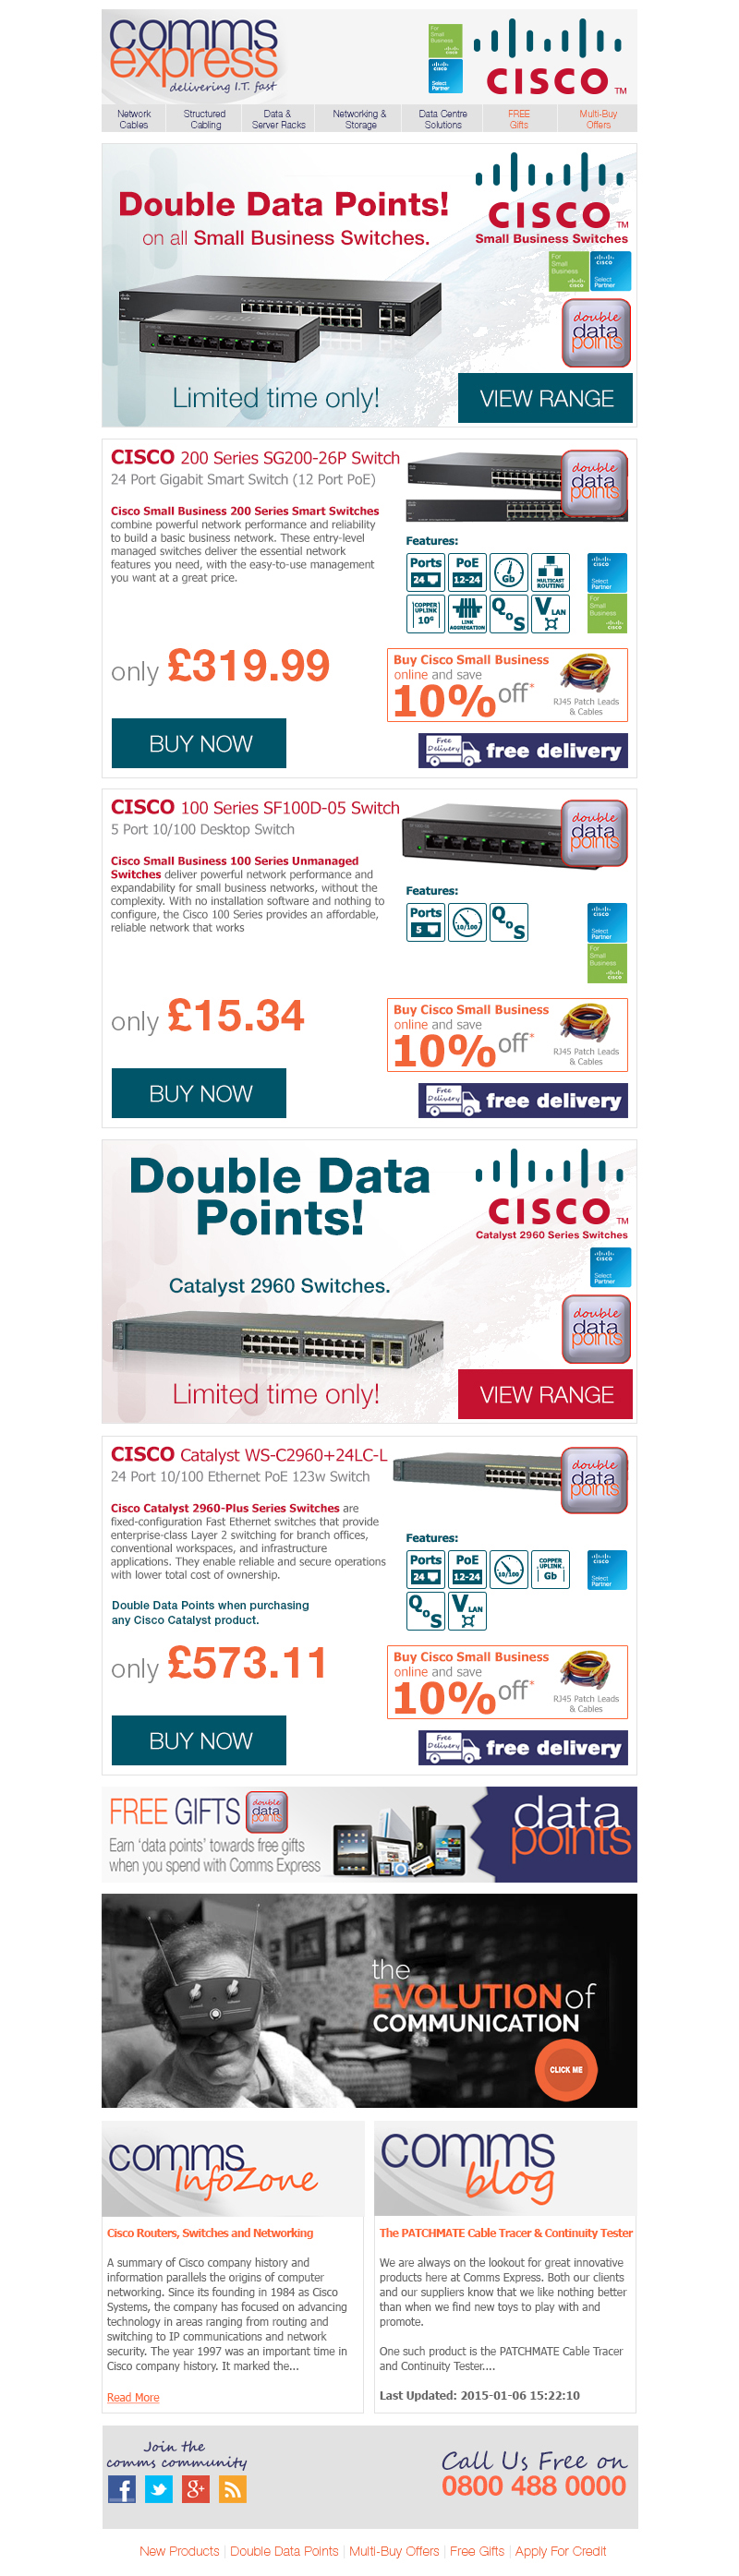 Cisco Small Business Catalyst 2960 Switches Double Data